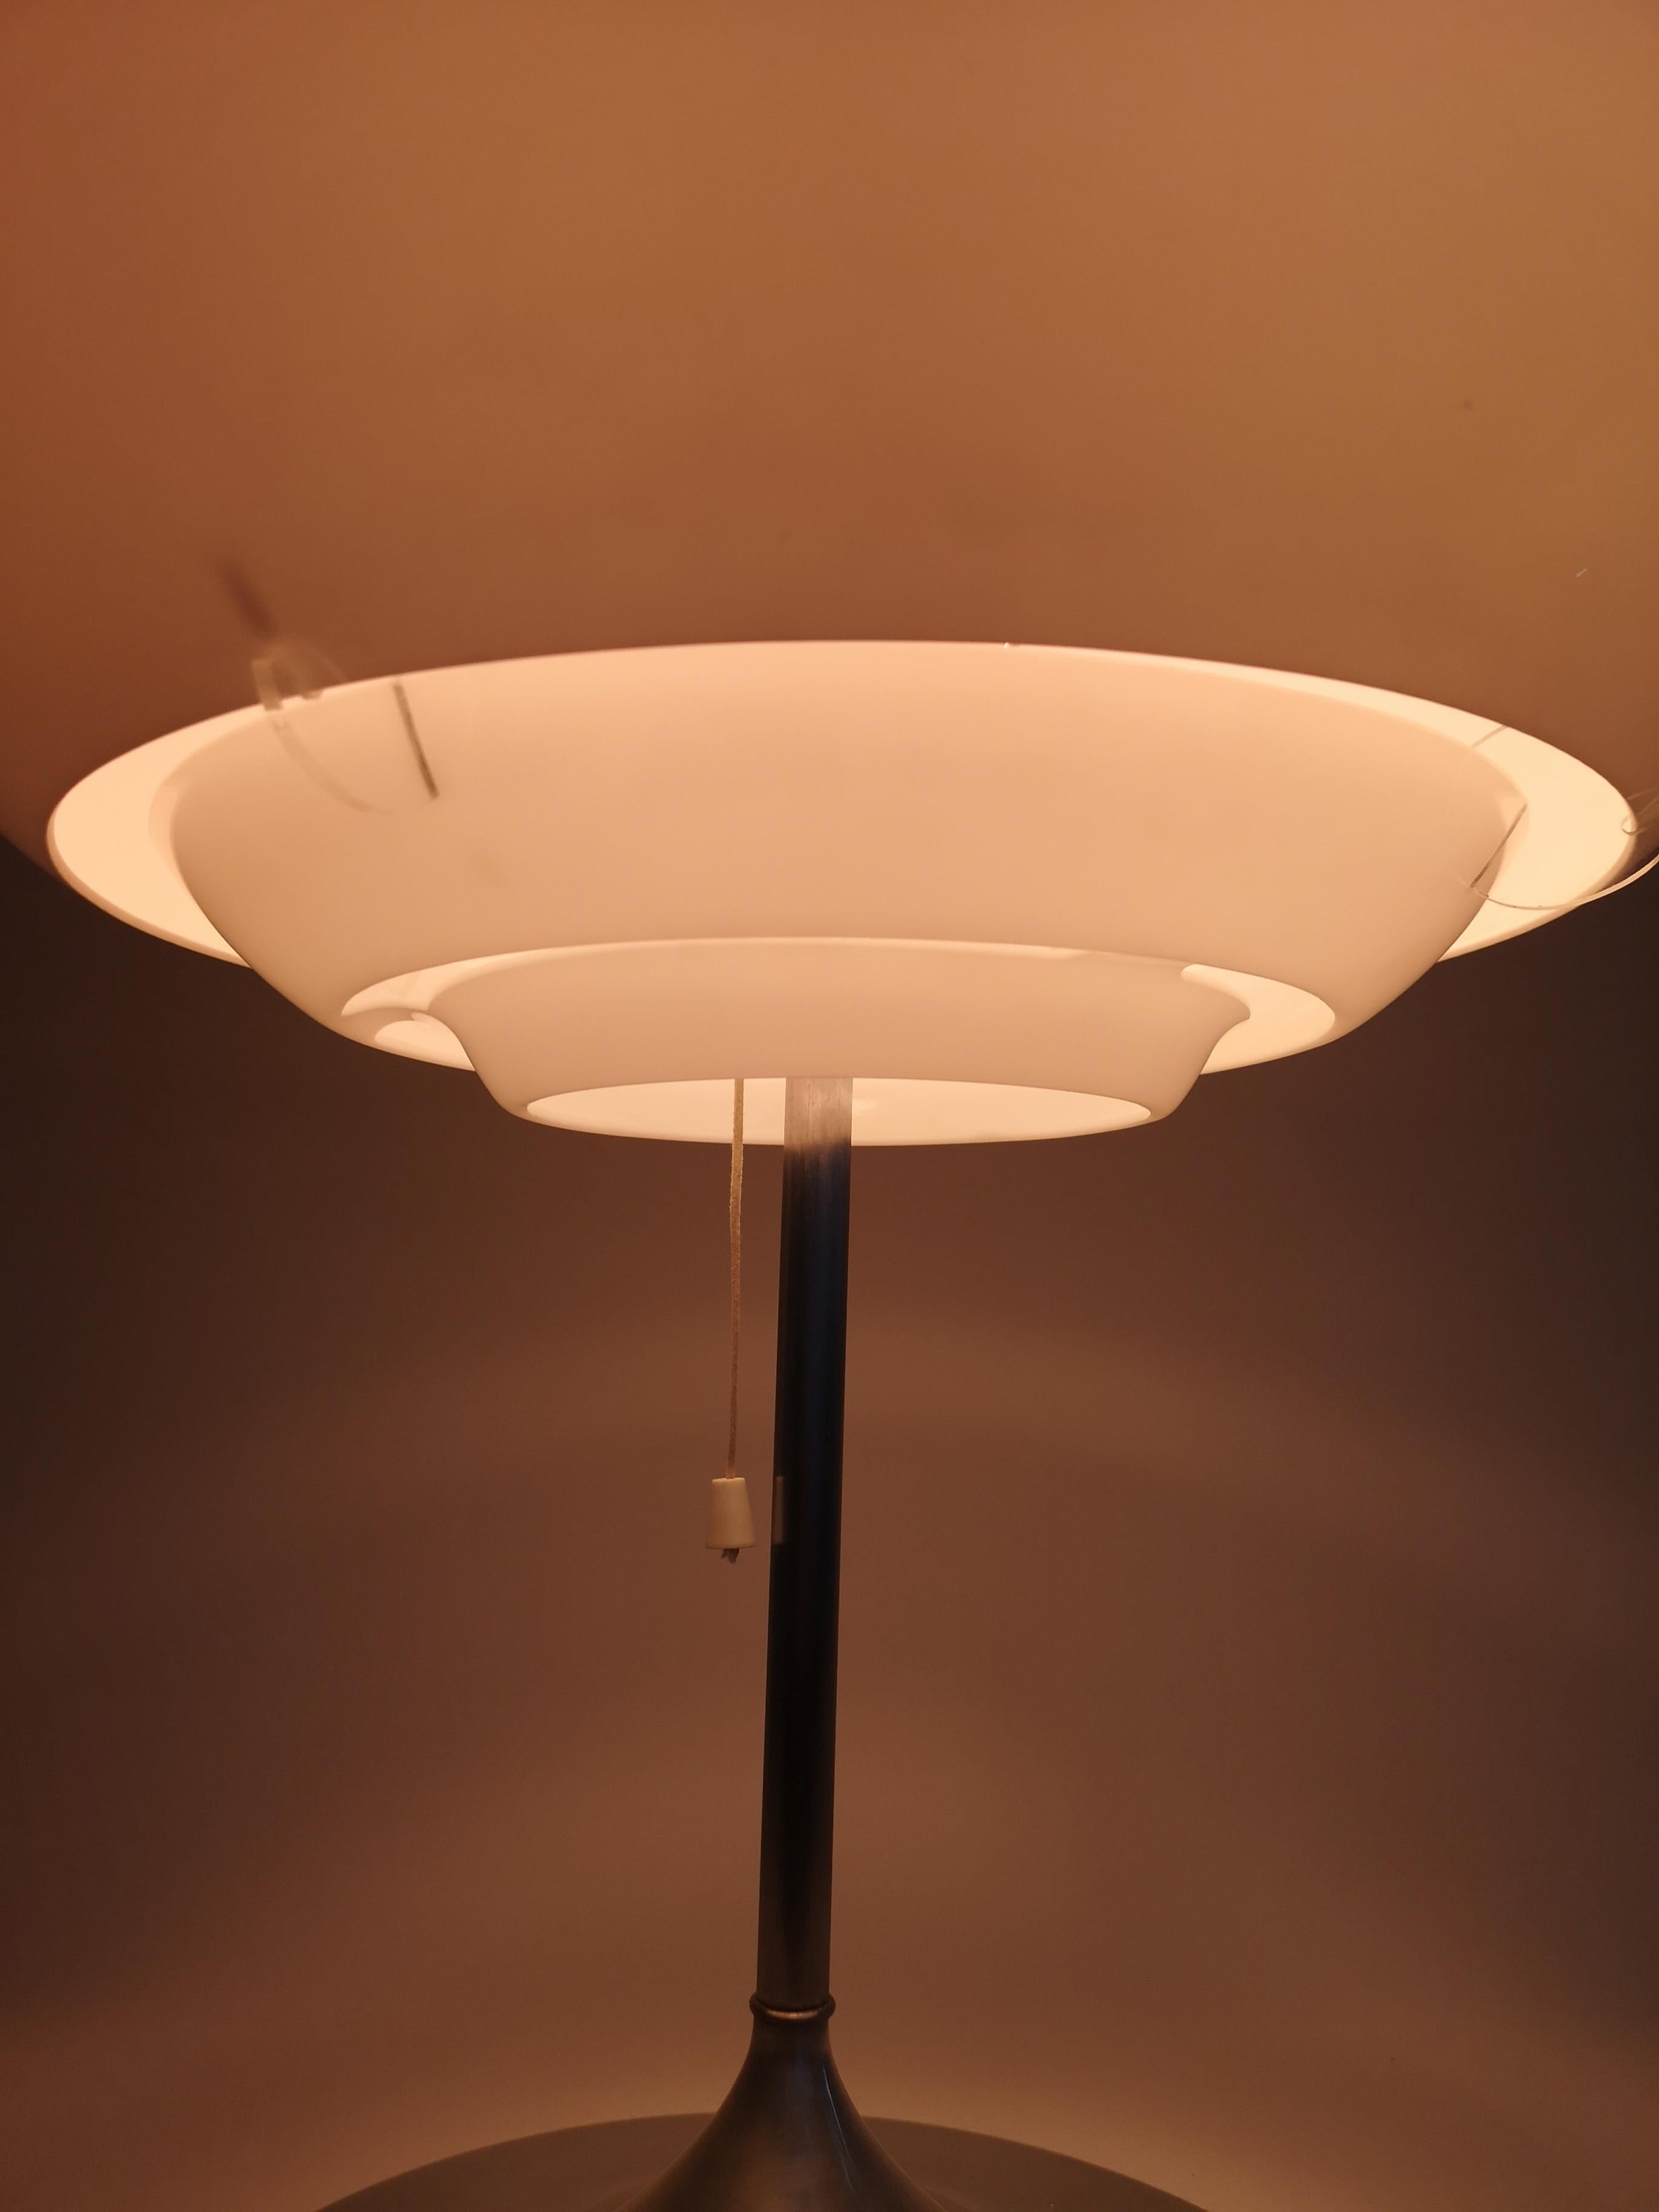 Midcentury Table Lamp Bergboms B-105 Art Deco Style, 1960s, Sweden For Sale 3